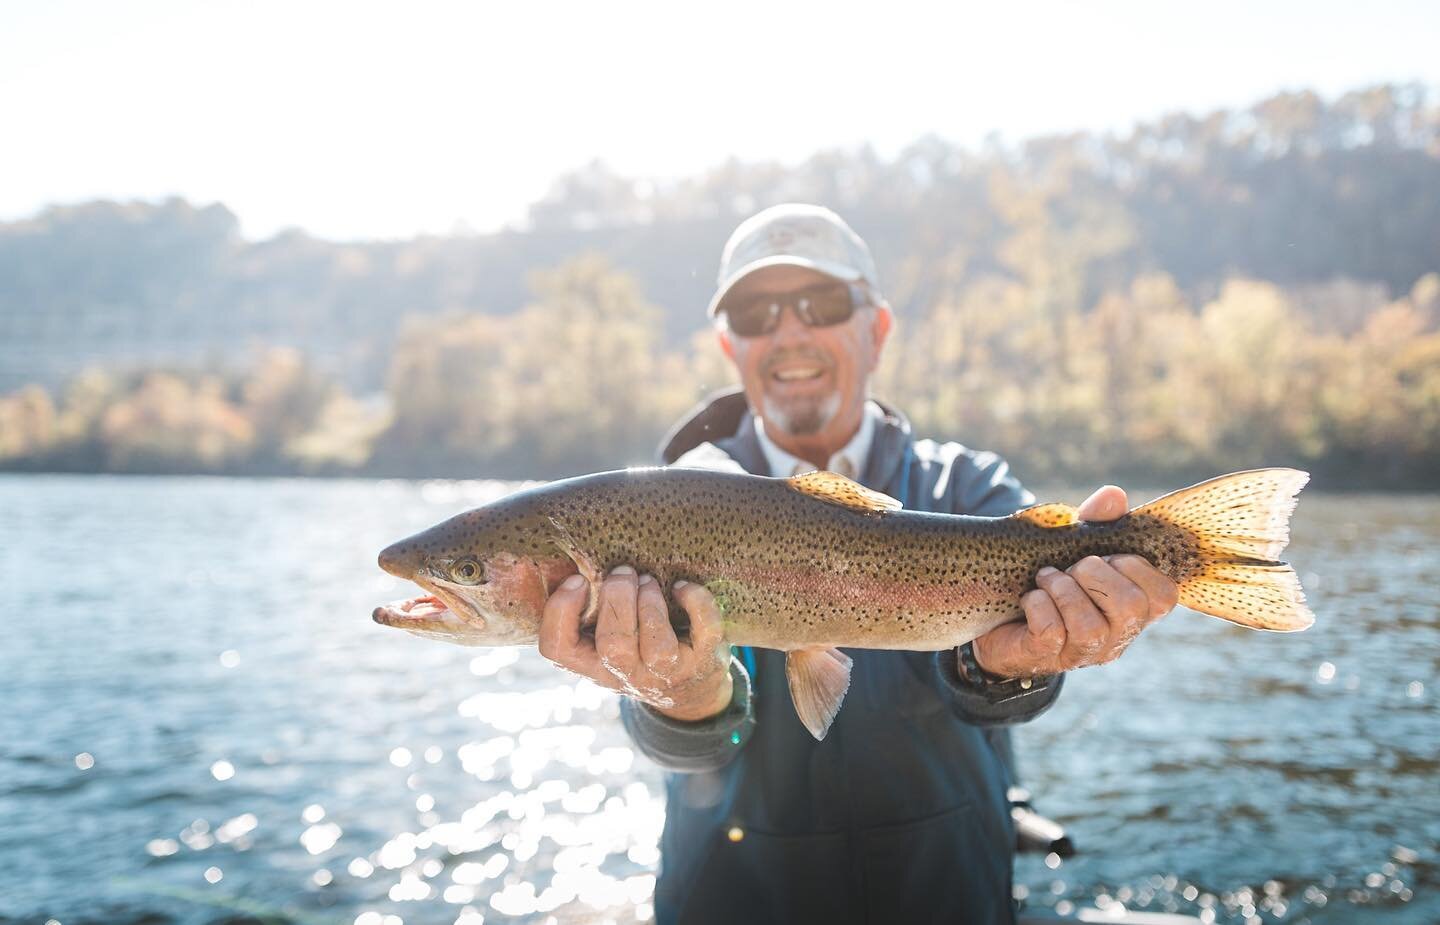 While our rivers have always been famous for their brown trout, the rainbows have been working hard to steal the show this year. Not only do you have the chance to catch multiple high quality fish like this below Bull Shoals Dam, but we are all seein